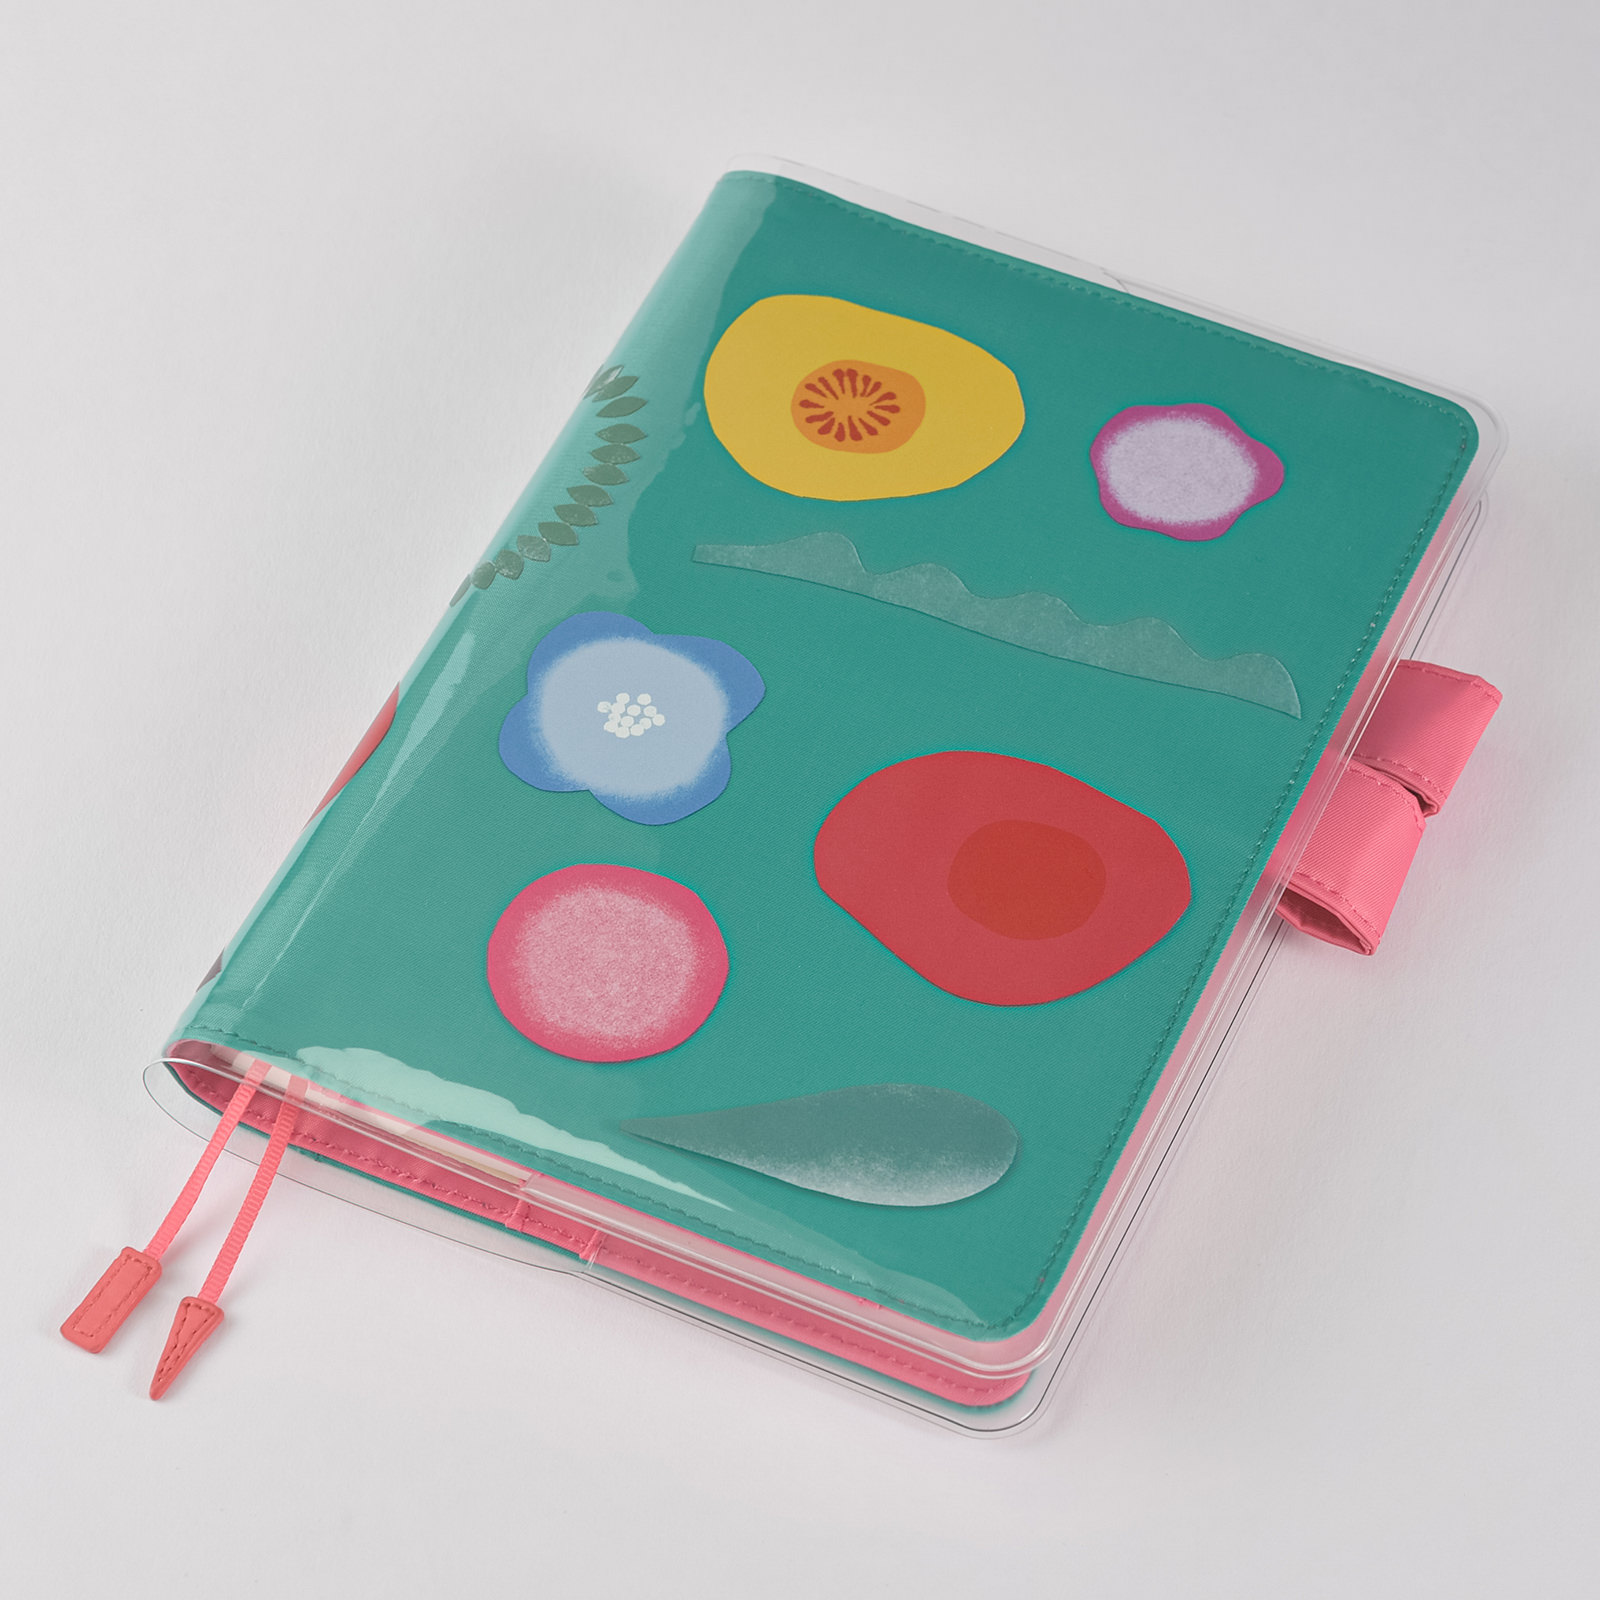 Hobonichi: Cover on Cover “Stockholm” for Cousin - Accessories Lineup -  Hobonichi Techo 2018